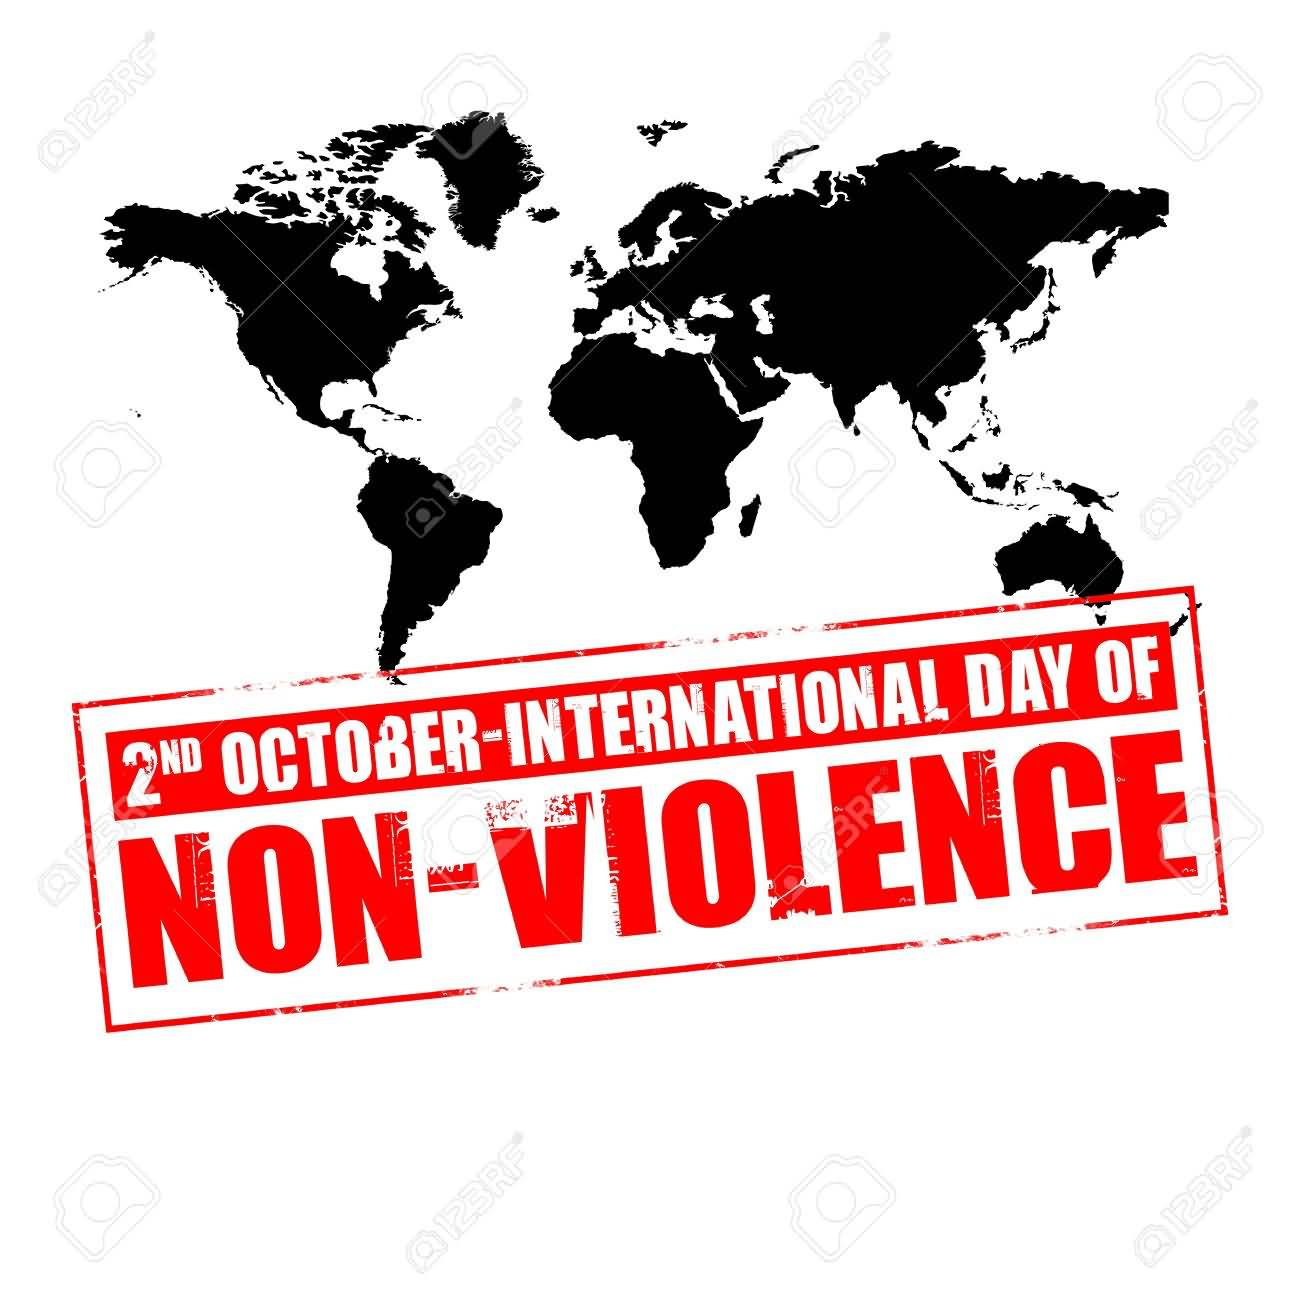 2nd October International Day of Non-Violence Image